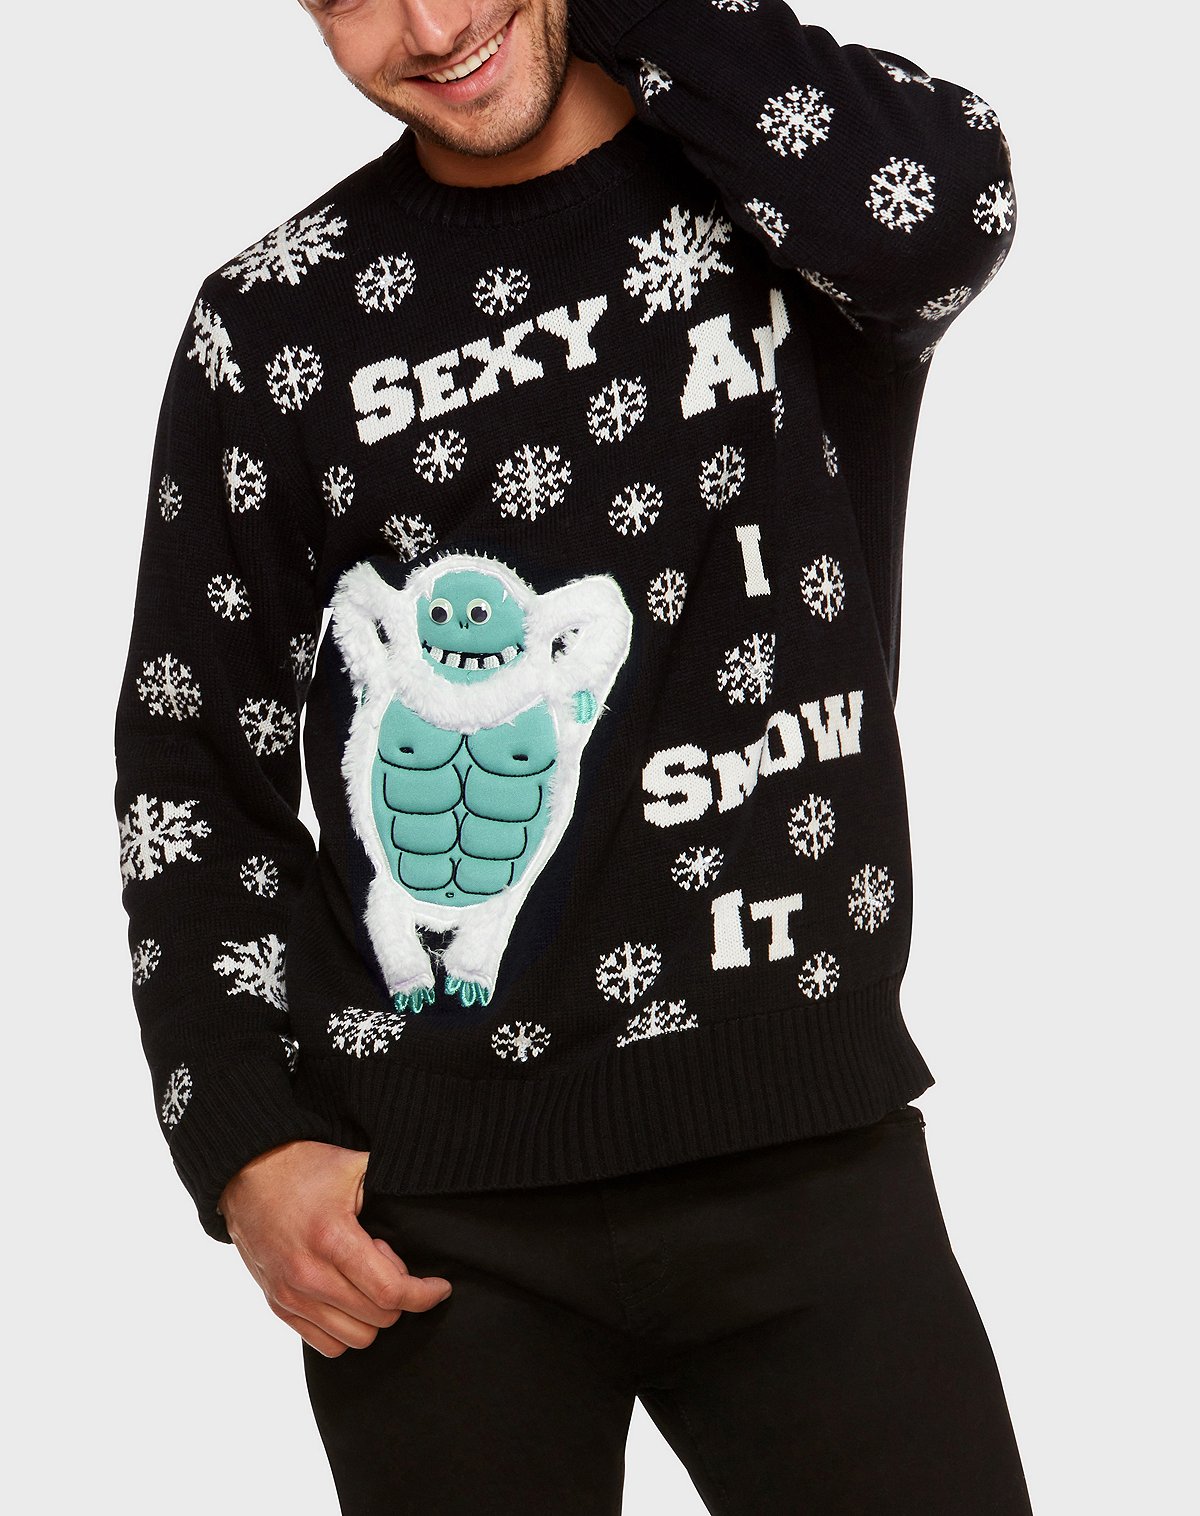 Spencer's Sexy and I Snow It Ugly Christmas Sweater